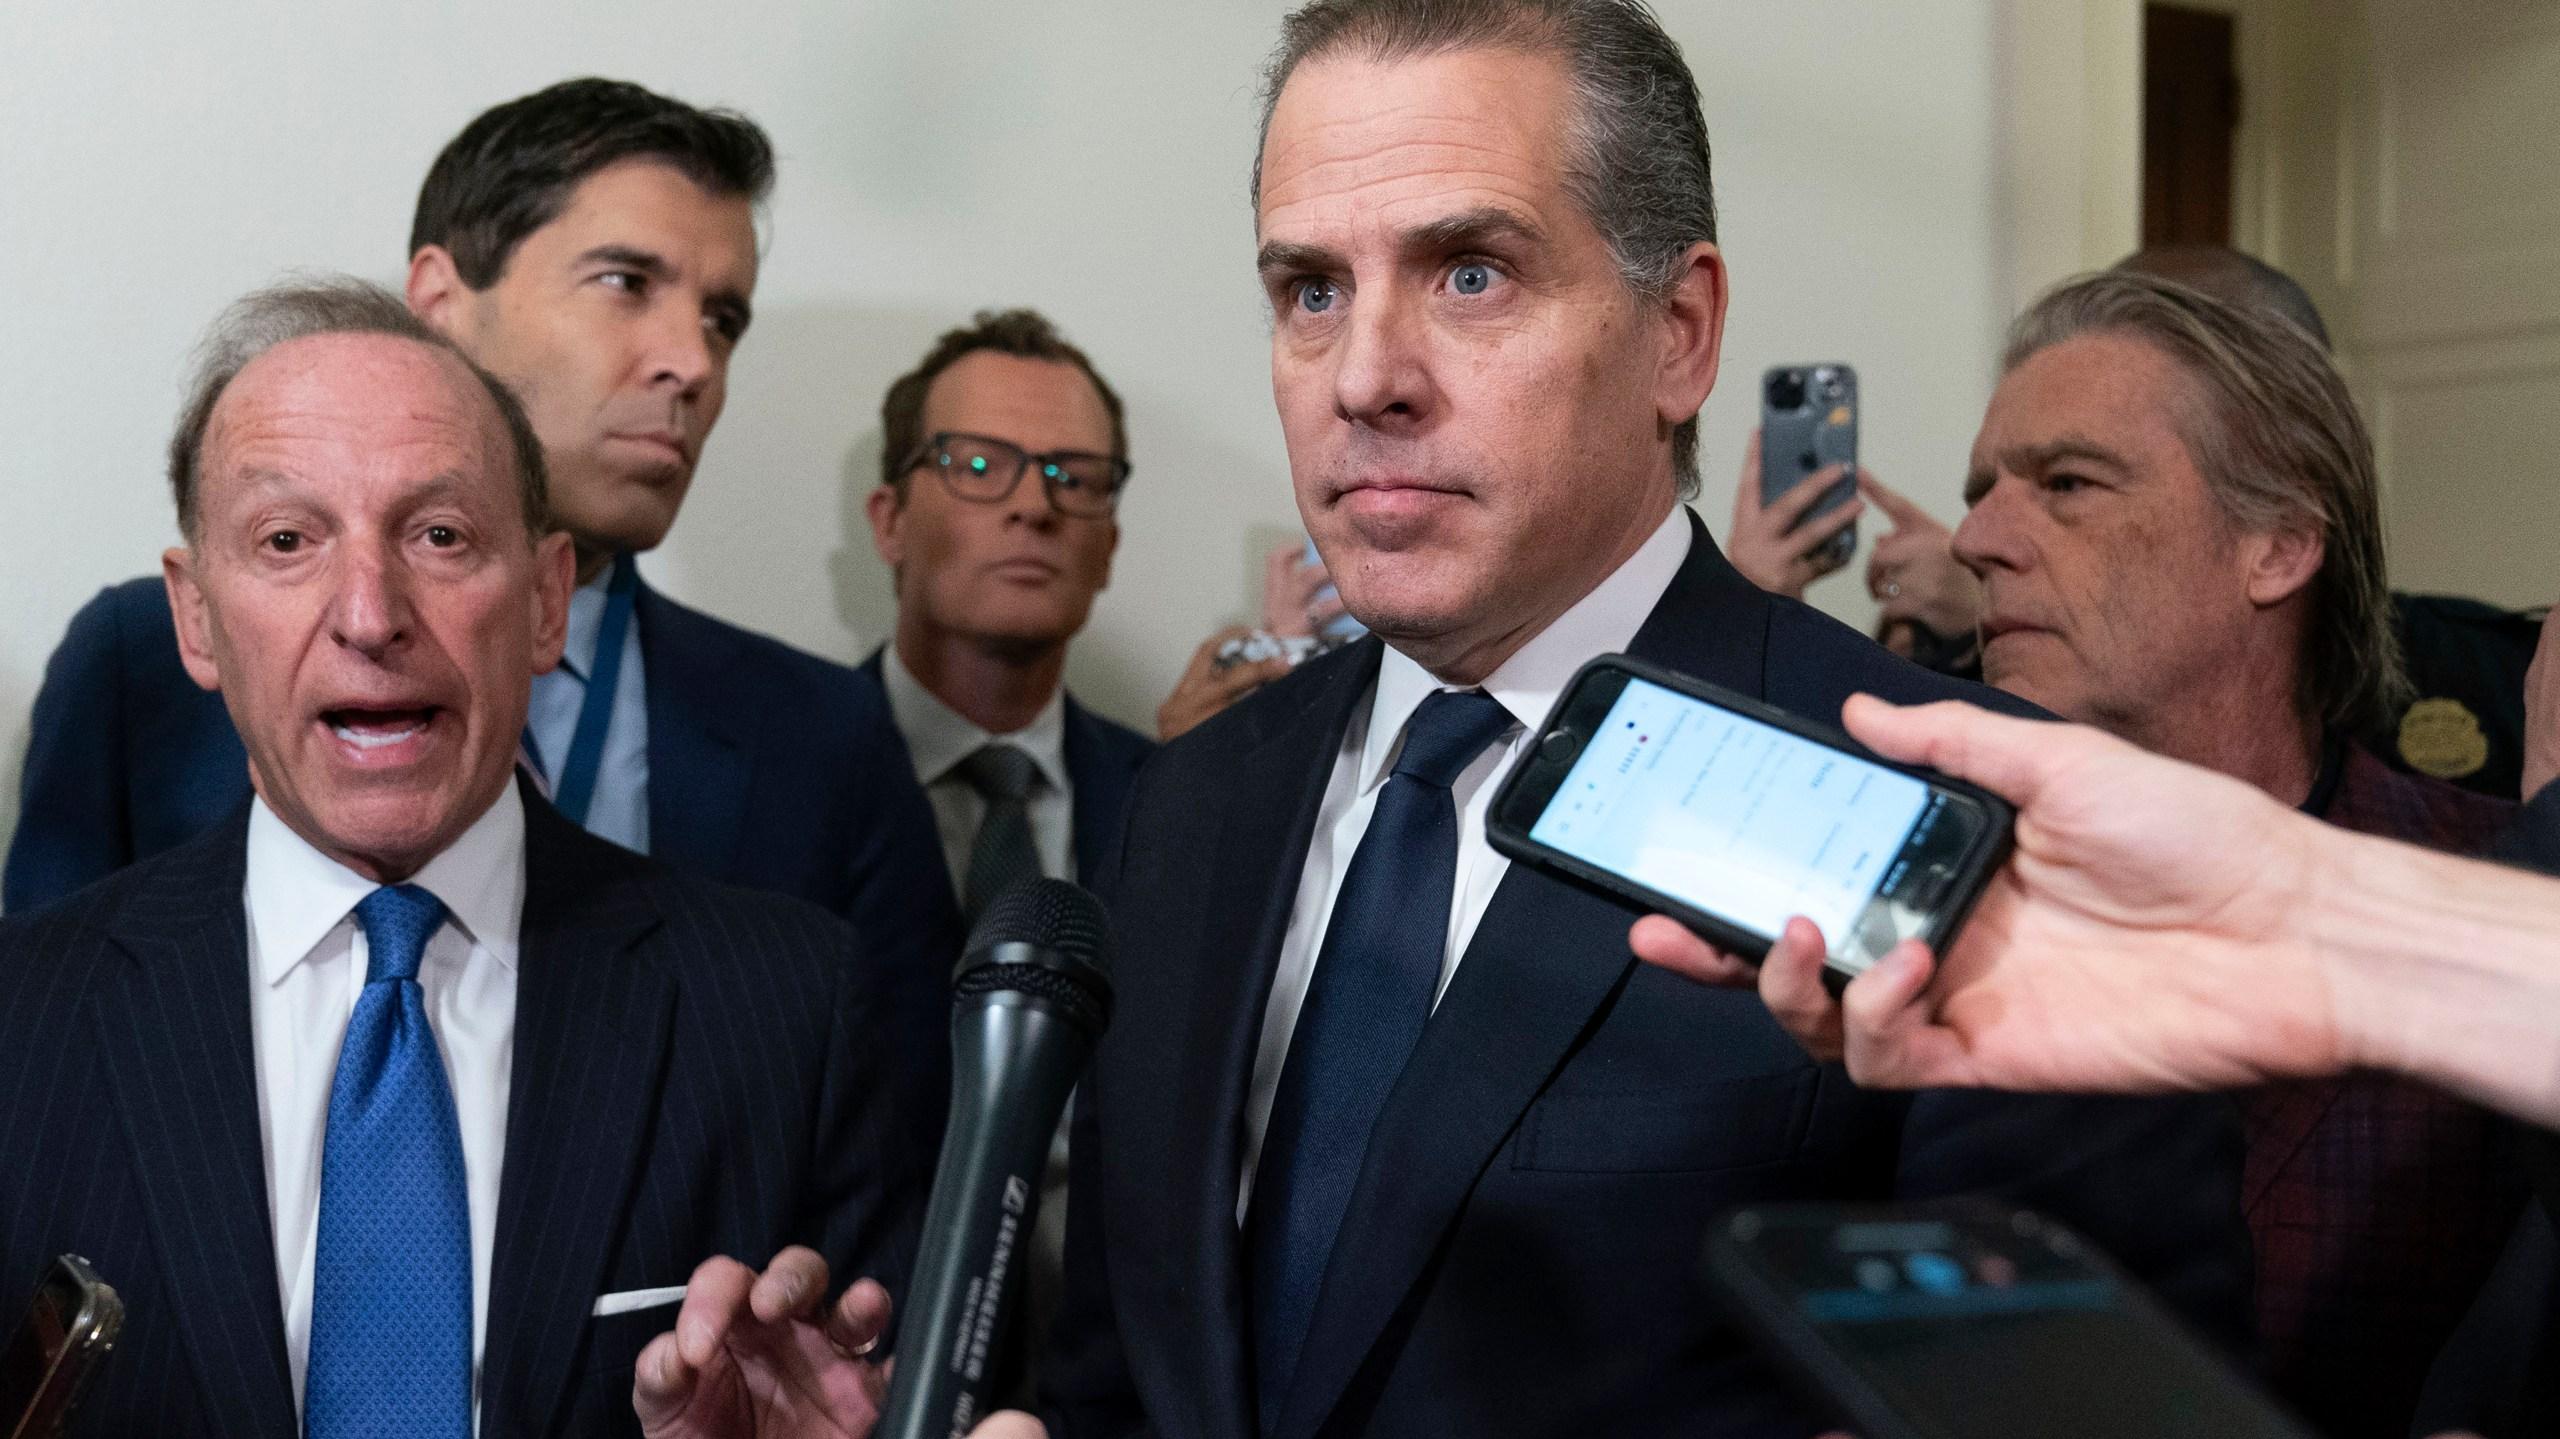 Hunter Biden Agrees To Private Deposition With Republicans After